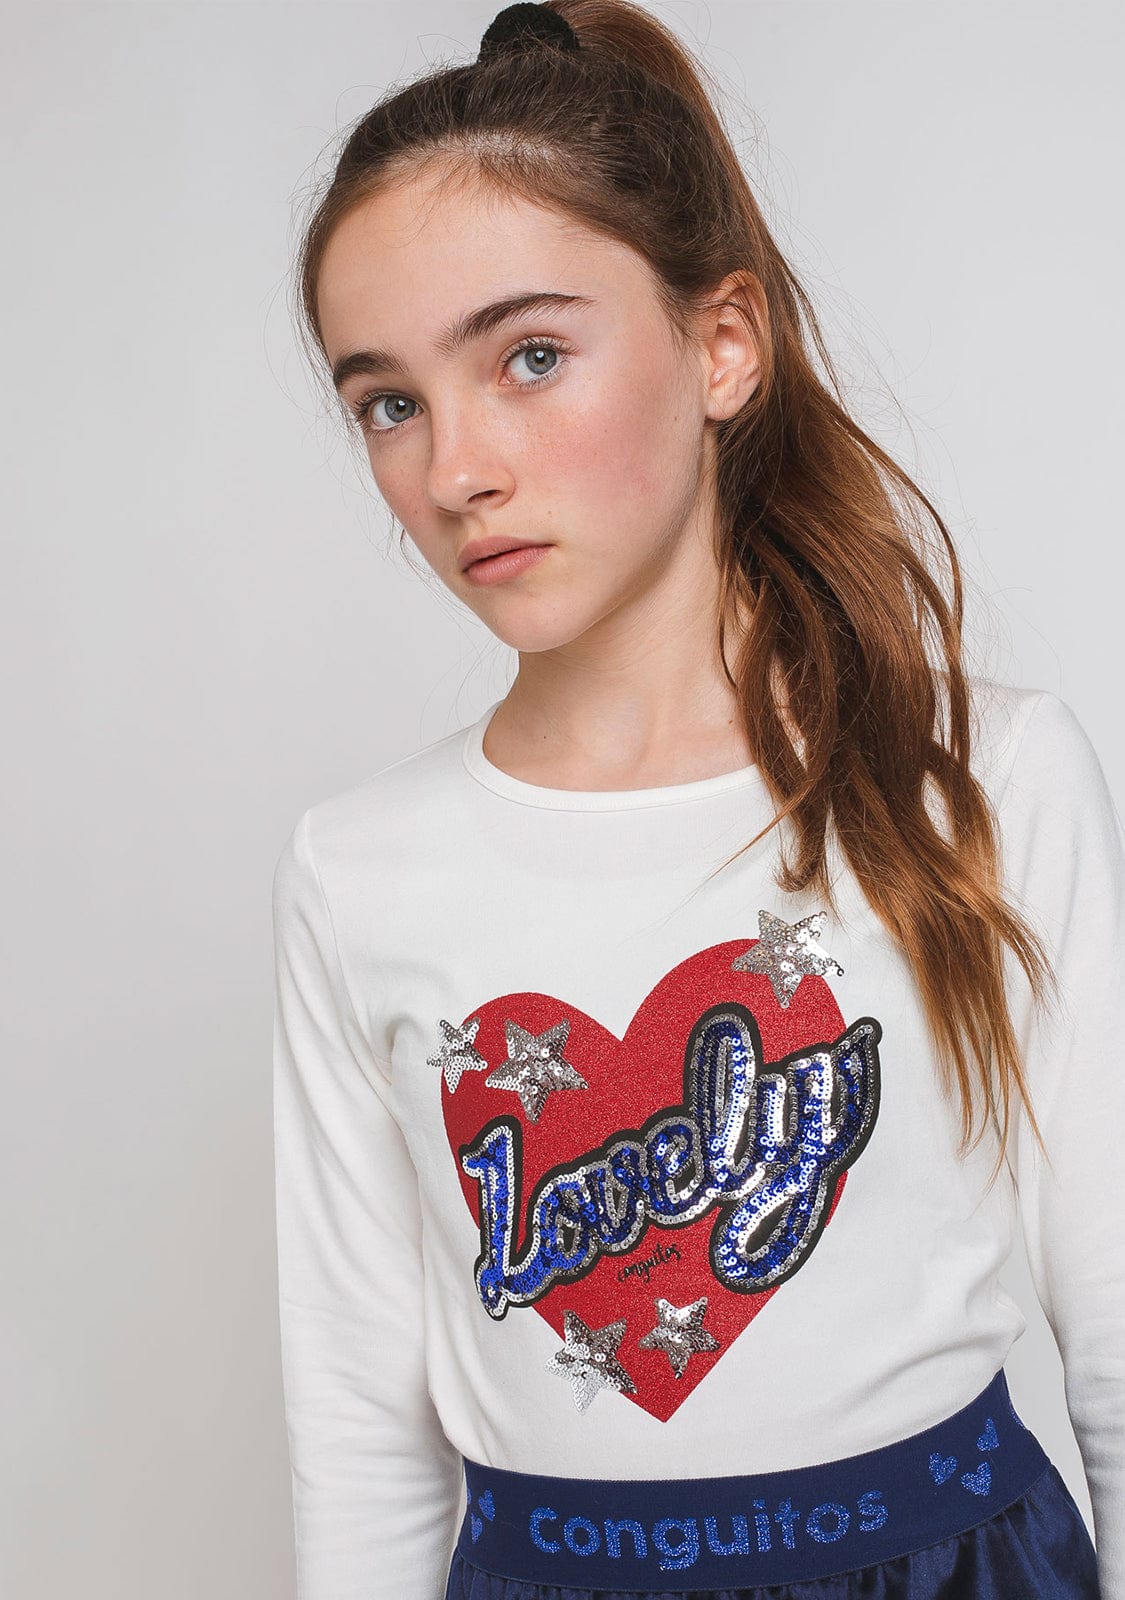 CONGUITOS TEXTIL Clothing Girl's "Lovely Heart" T-shirt